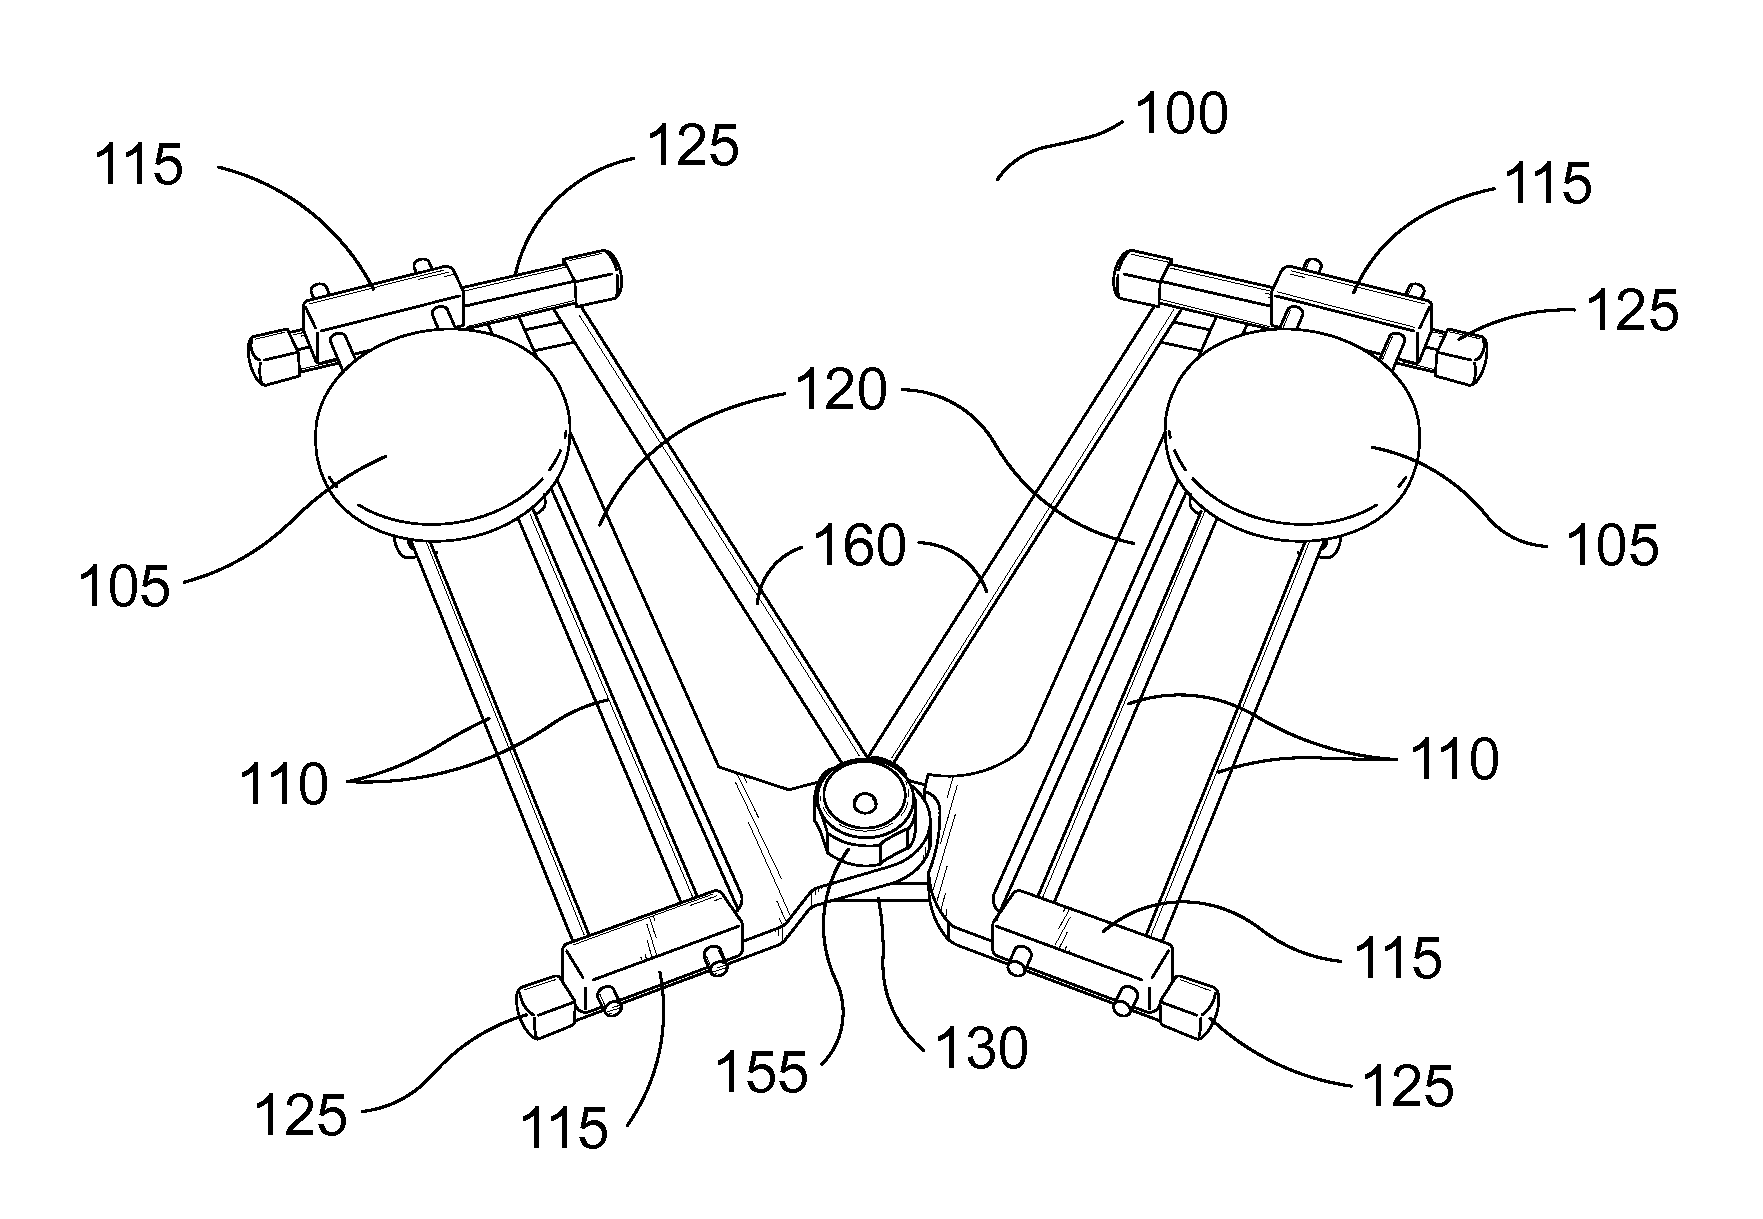 Apparatus for Aerobic Leg Exercise of a Seated User